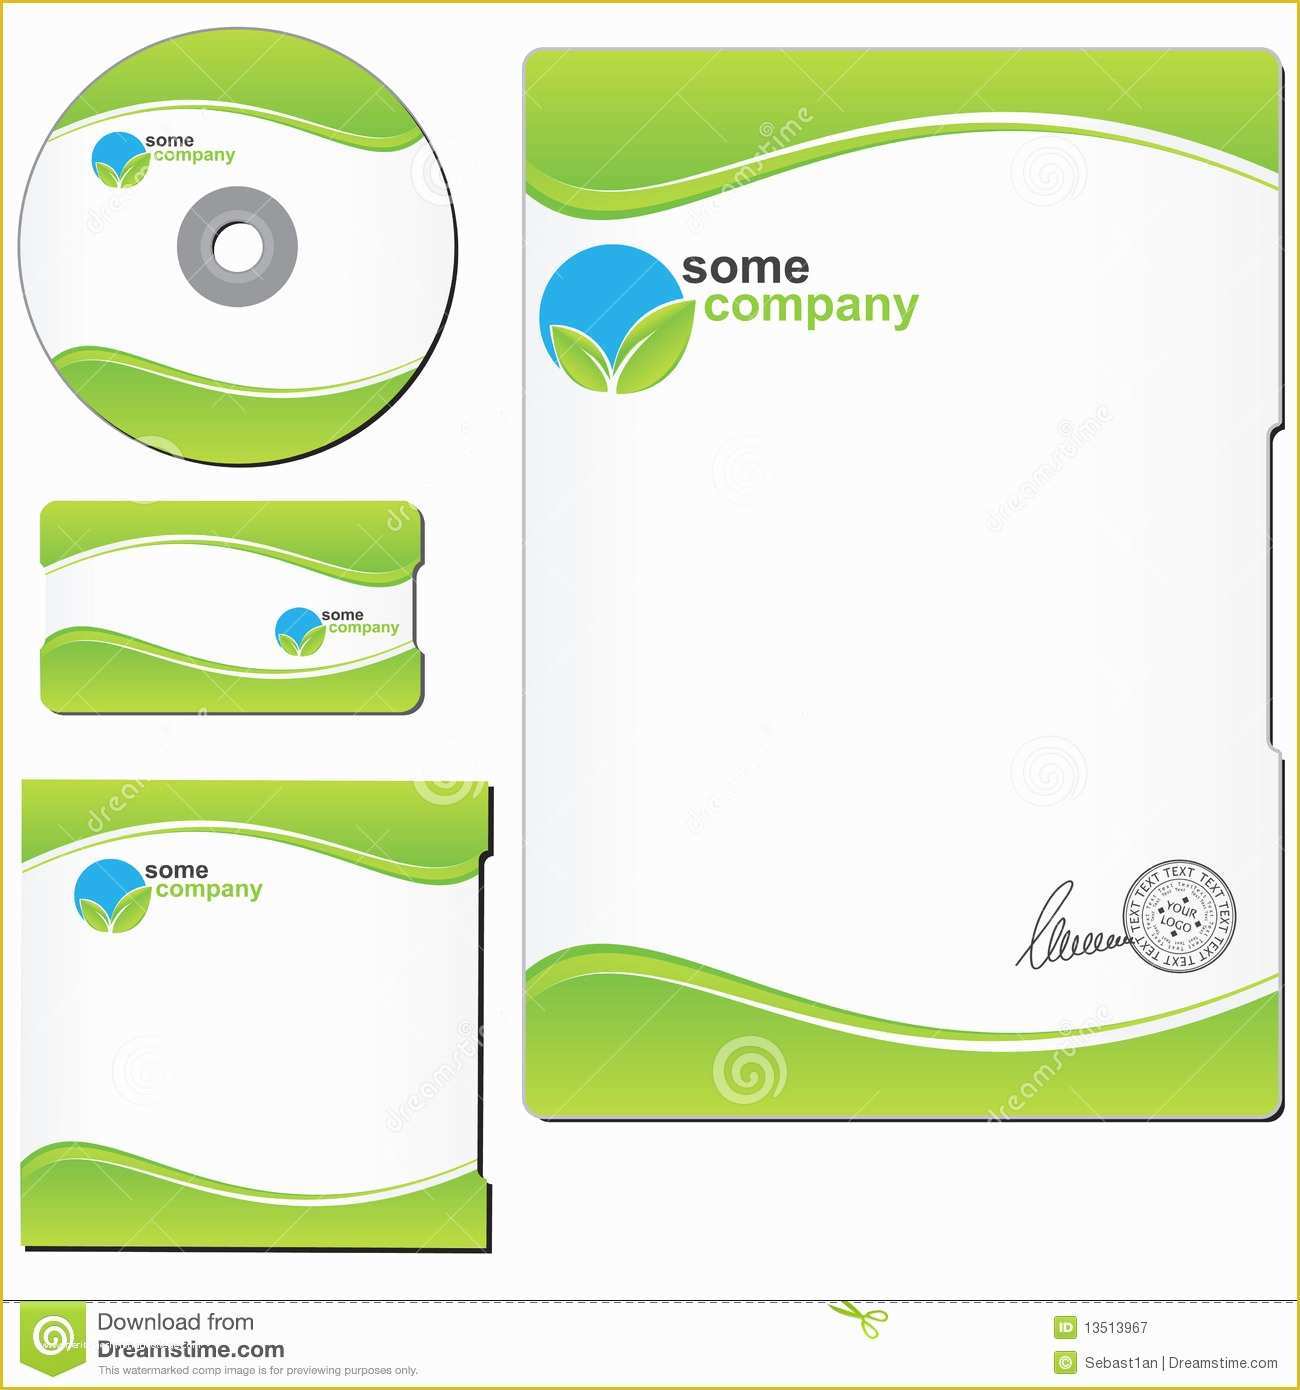 Brochure Layout Templates Free Download Of Groups Visual Basic for Applications 7862a53c666d